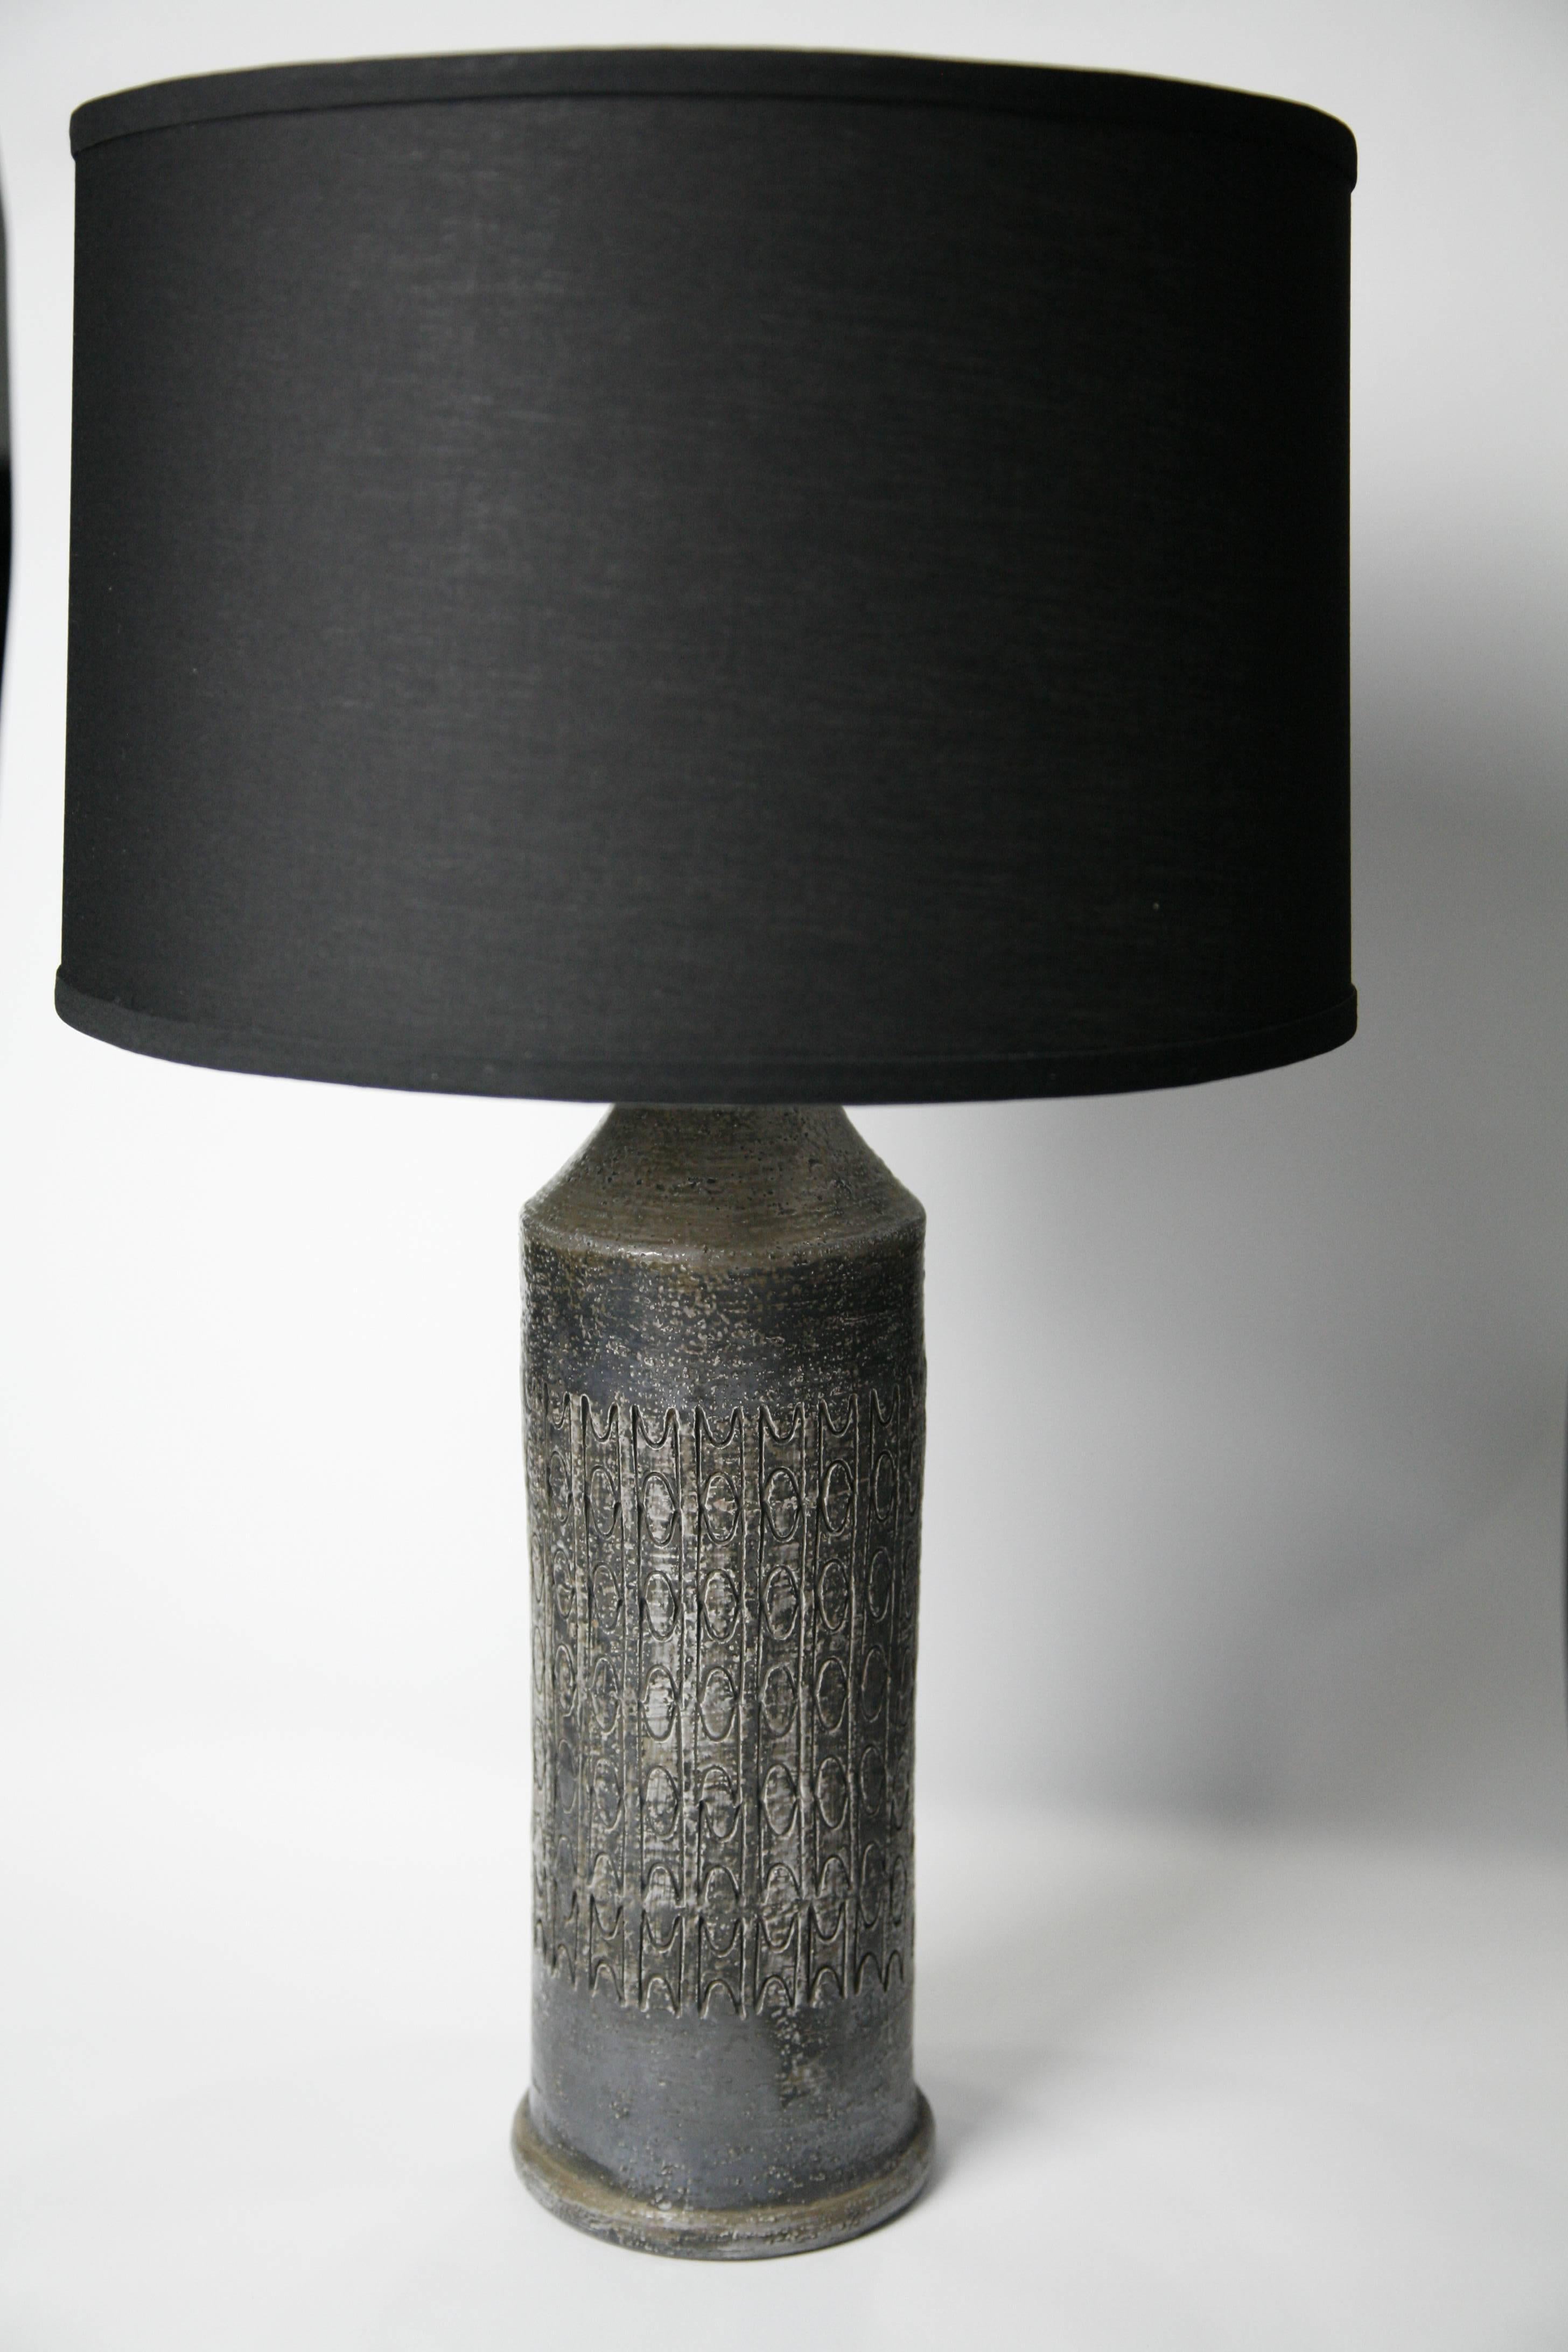 Bitossi lamps Italy 1970s ceramic in a black and silver multi layered glaze.
Swanky totally out of time pair of dark Italian ceramic lamps from 1960s could as well have been part of the Blade runner movie interiors by Designer multi artist Aldo